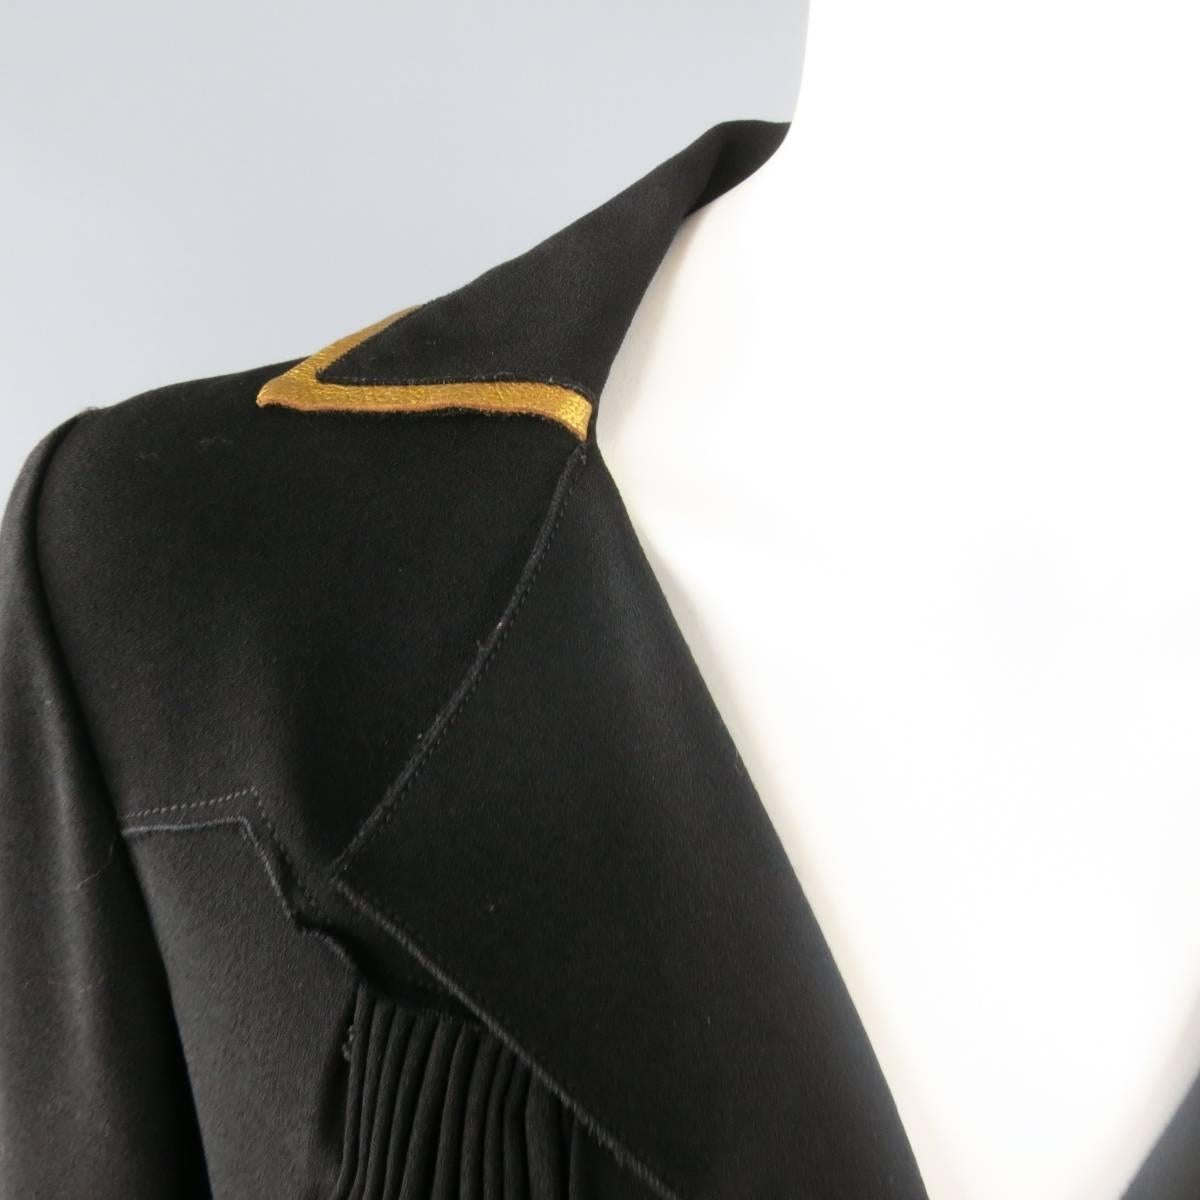 PRADA shirt jacket in a black crepe material featuring a pointed lapel collar, raw edge decorative shoulder panel, gathered pleat bust and waist, patch pockets, hidden snap closure, and gold leather trim throughout. Thread through pleats coming